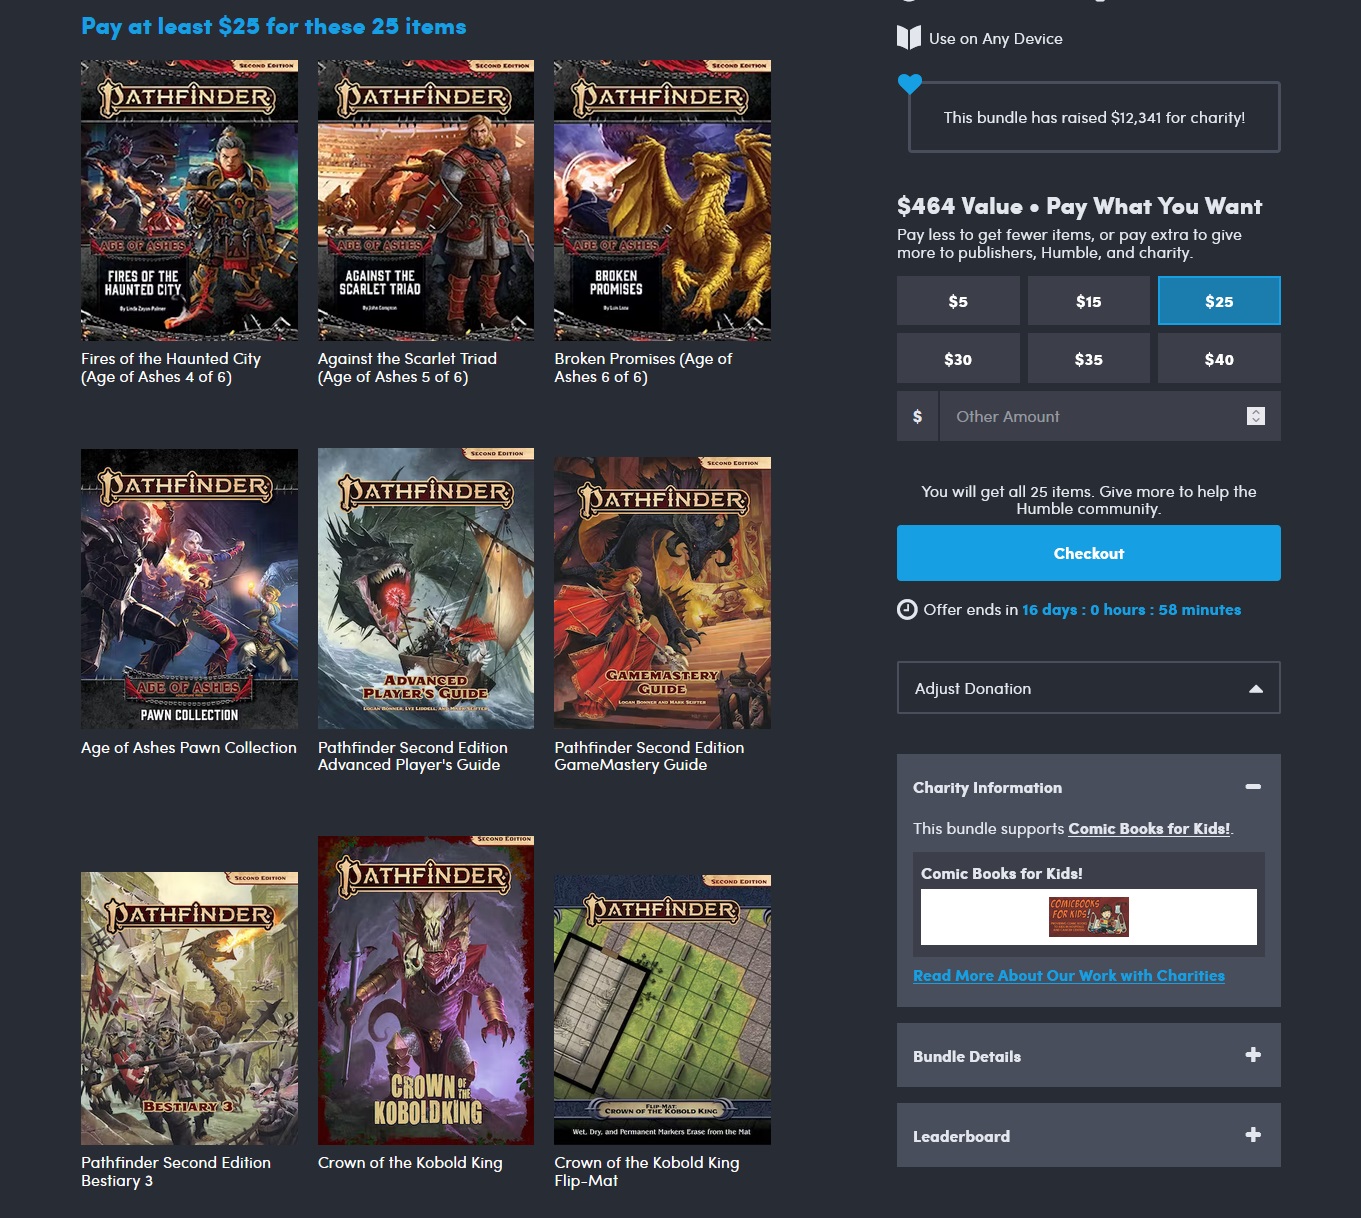 The BEST Way to start Pathfinder 2e? Is The Humble Bundle Worth it?! 